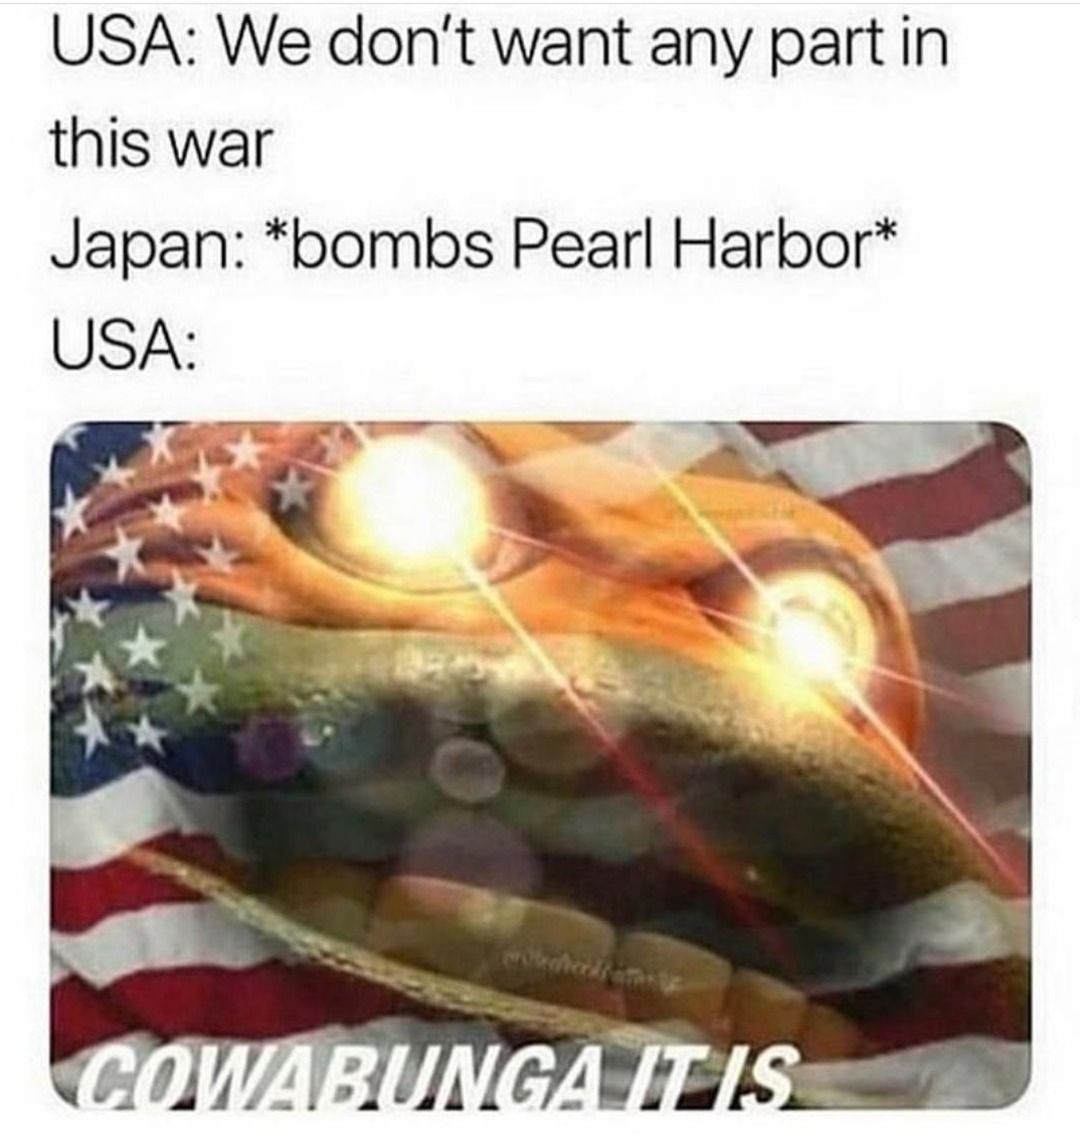 The United States declaring war on the Japanese empire